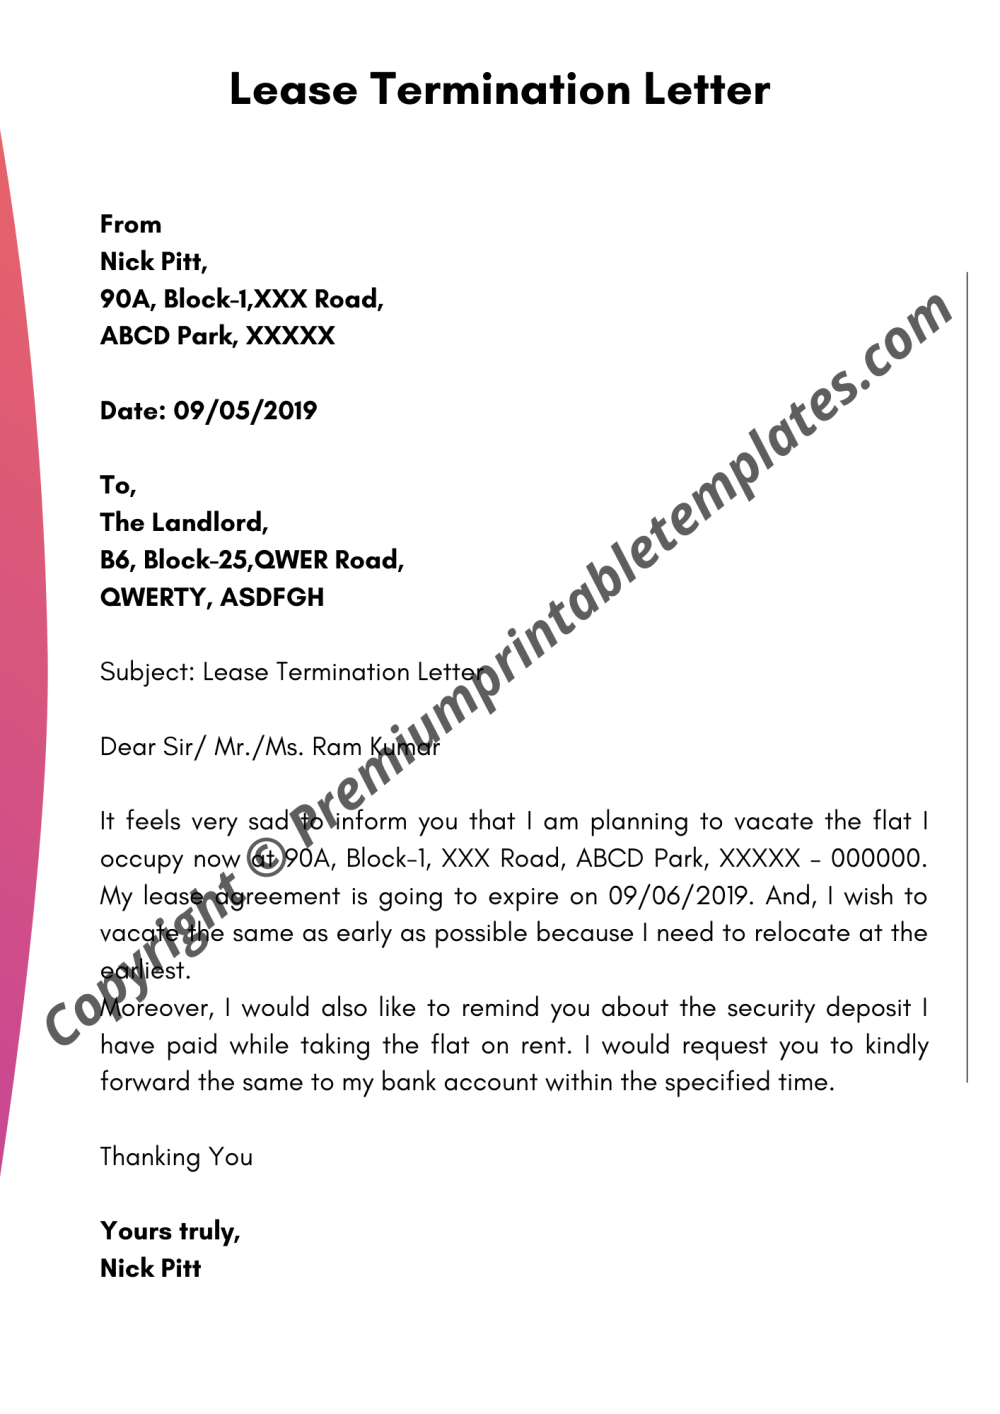 Lease Termination Letter